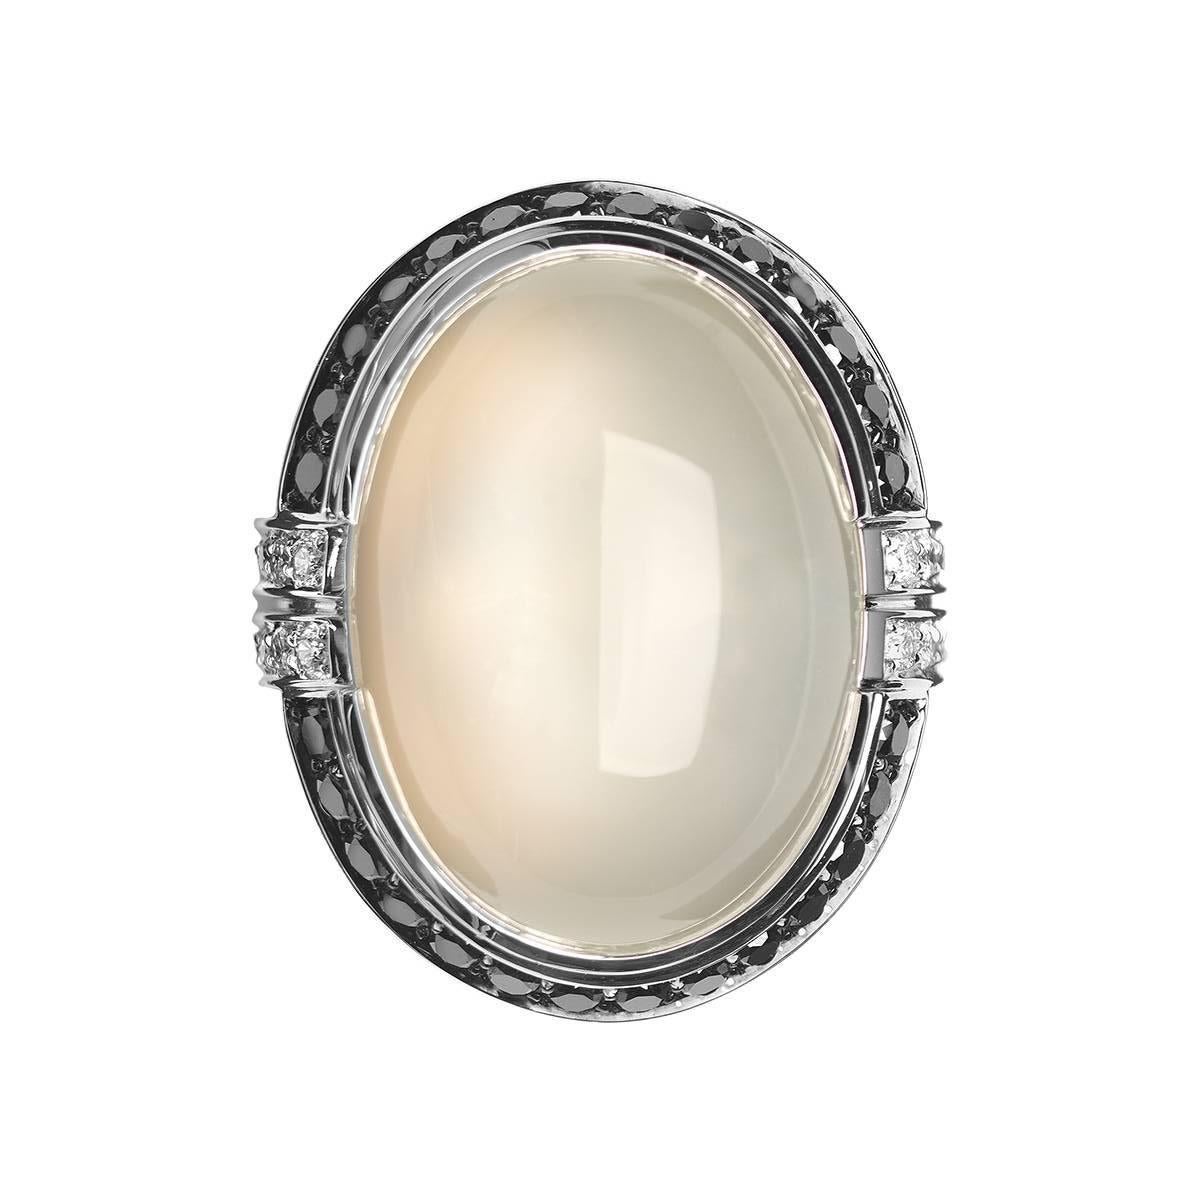 Crafted in white gold and set with black diamonds, white diamonds and an large oval cabochon white moonstone, this cocktail ring has a distinct Art Deco-era feel. This ring is part of Monseo 'Apolo Collection'  which is a collection of Modern